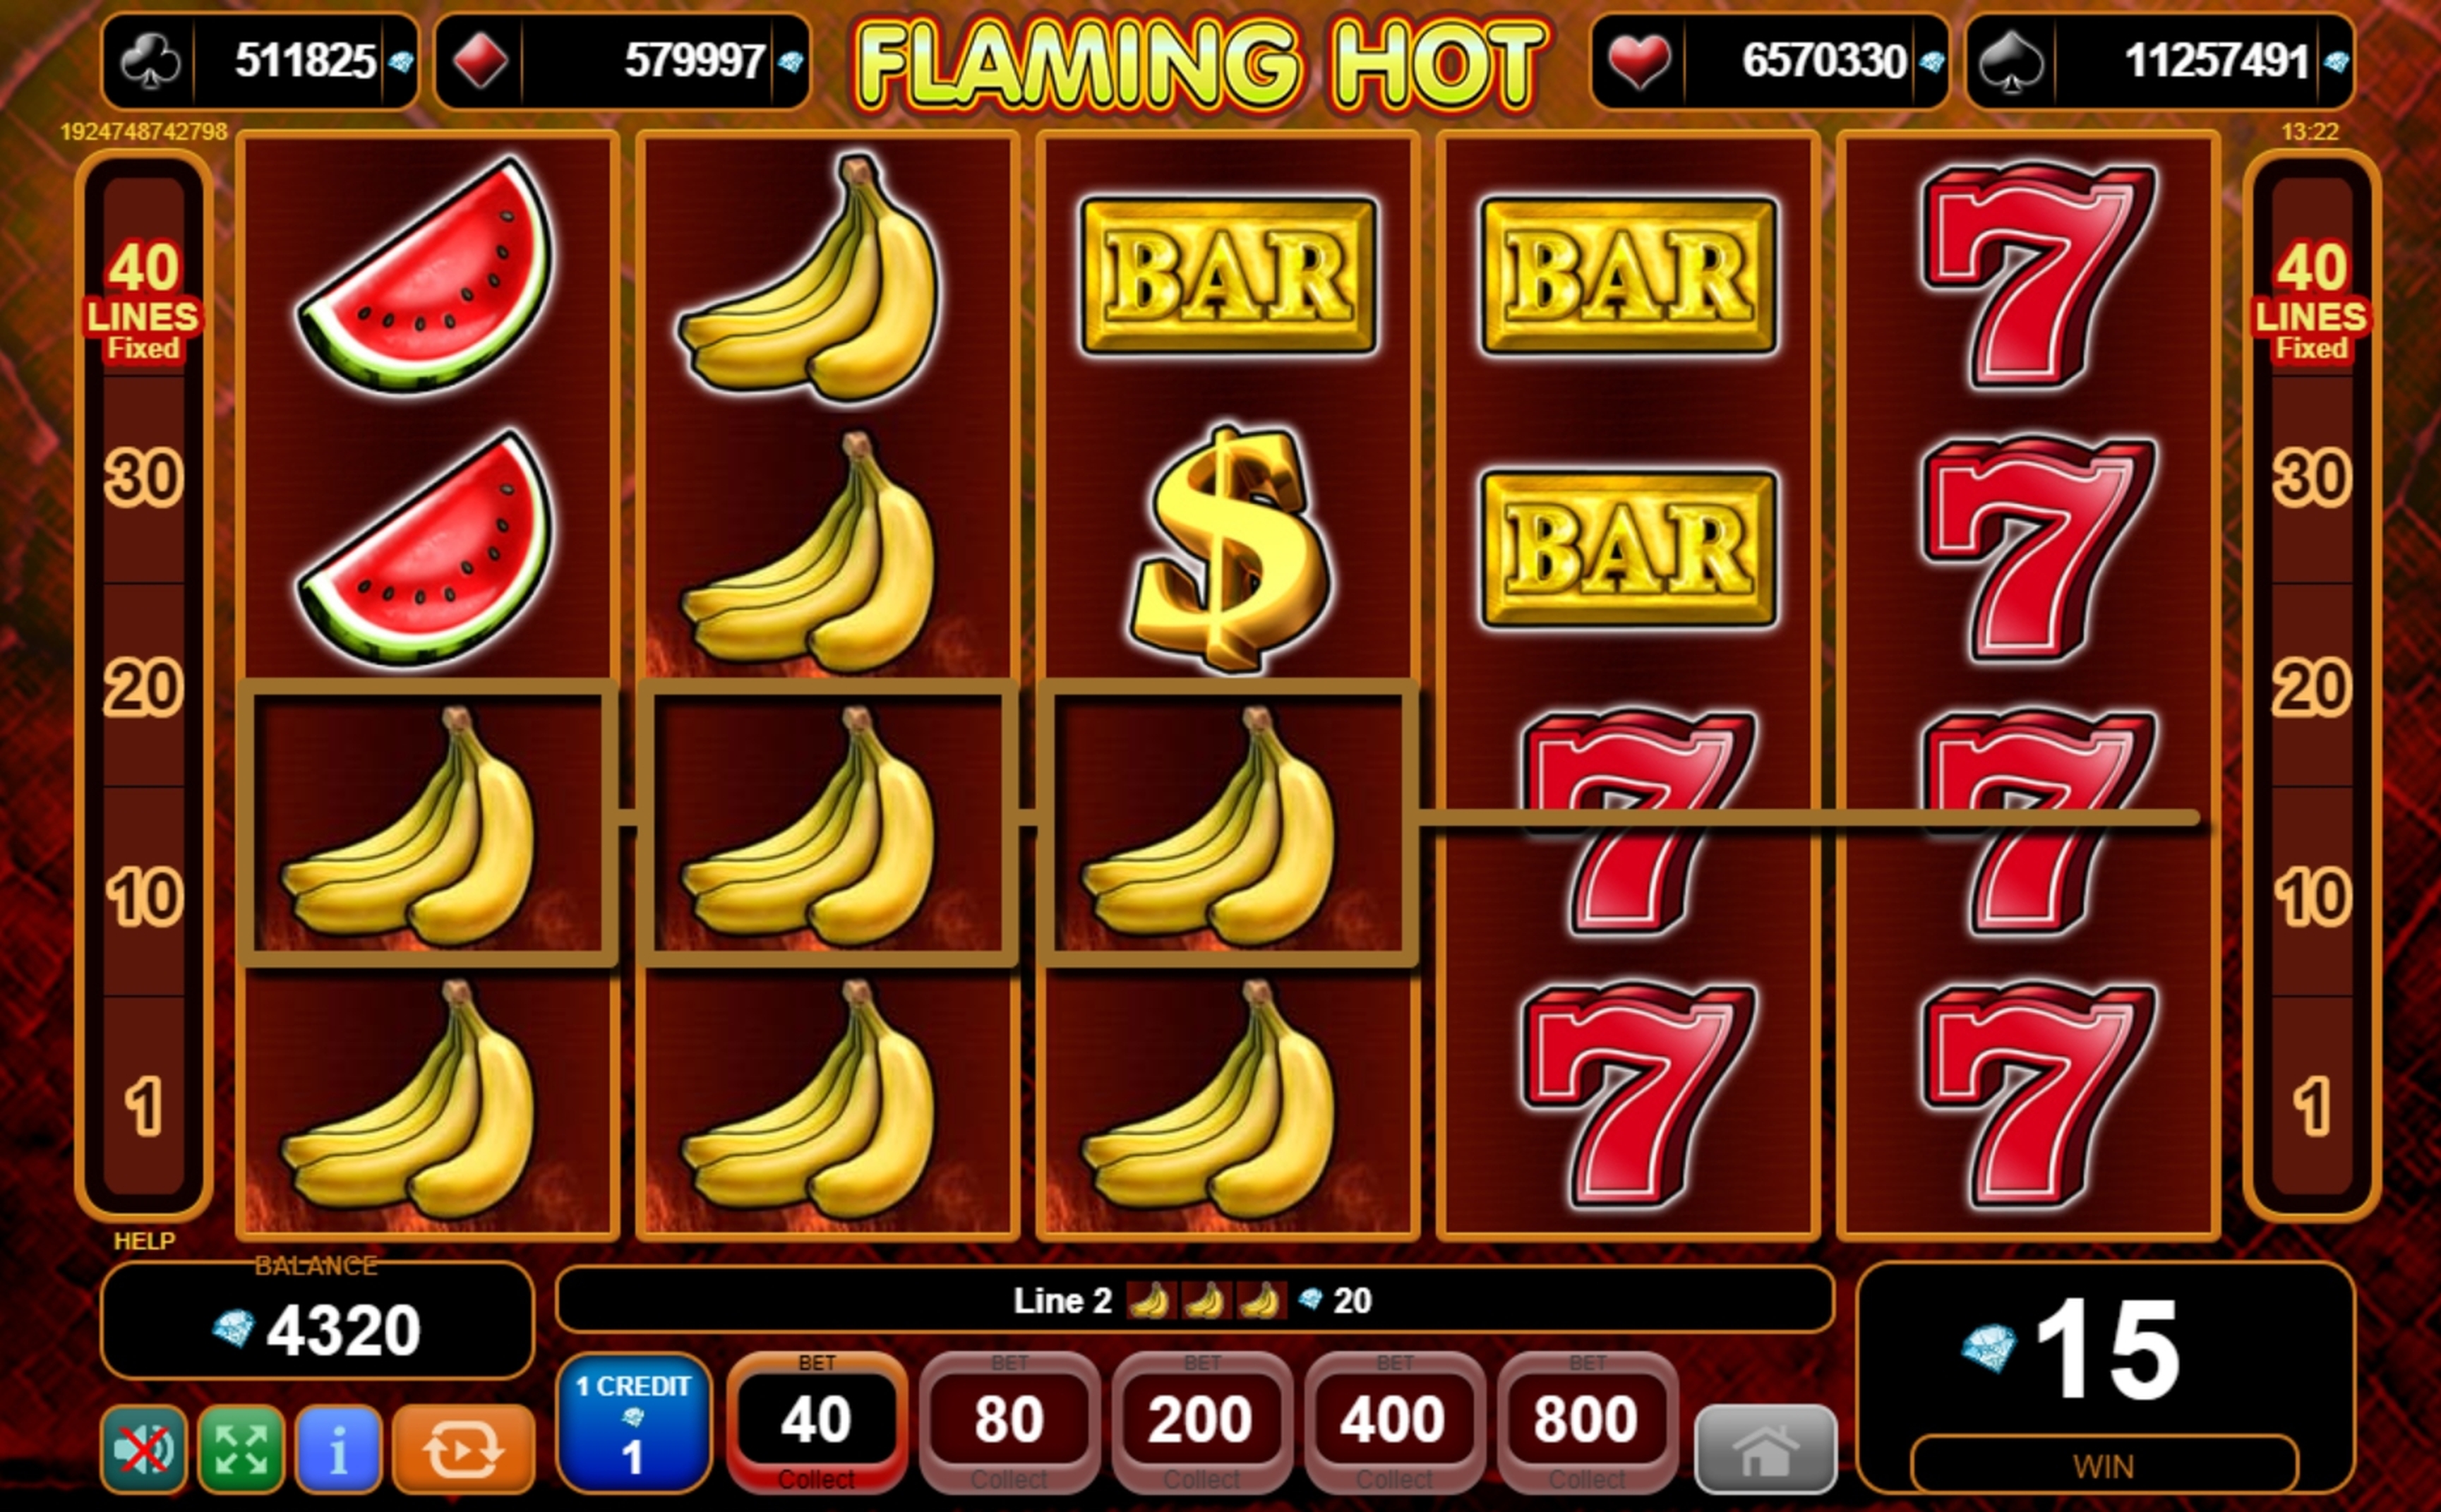 Win Money in Flaming Hot Free Slot Game by EGT